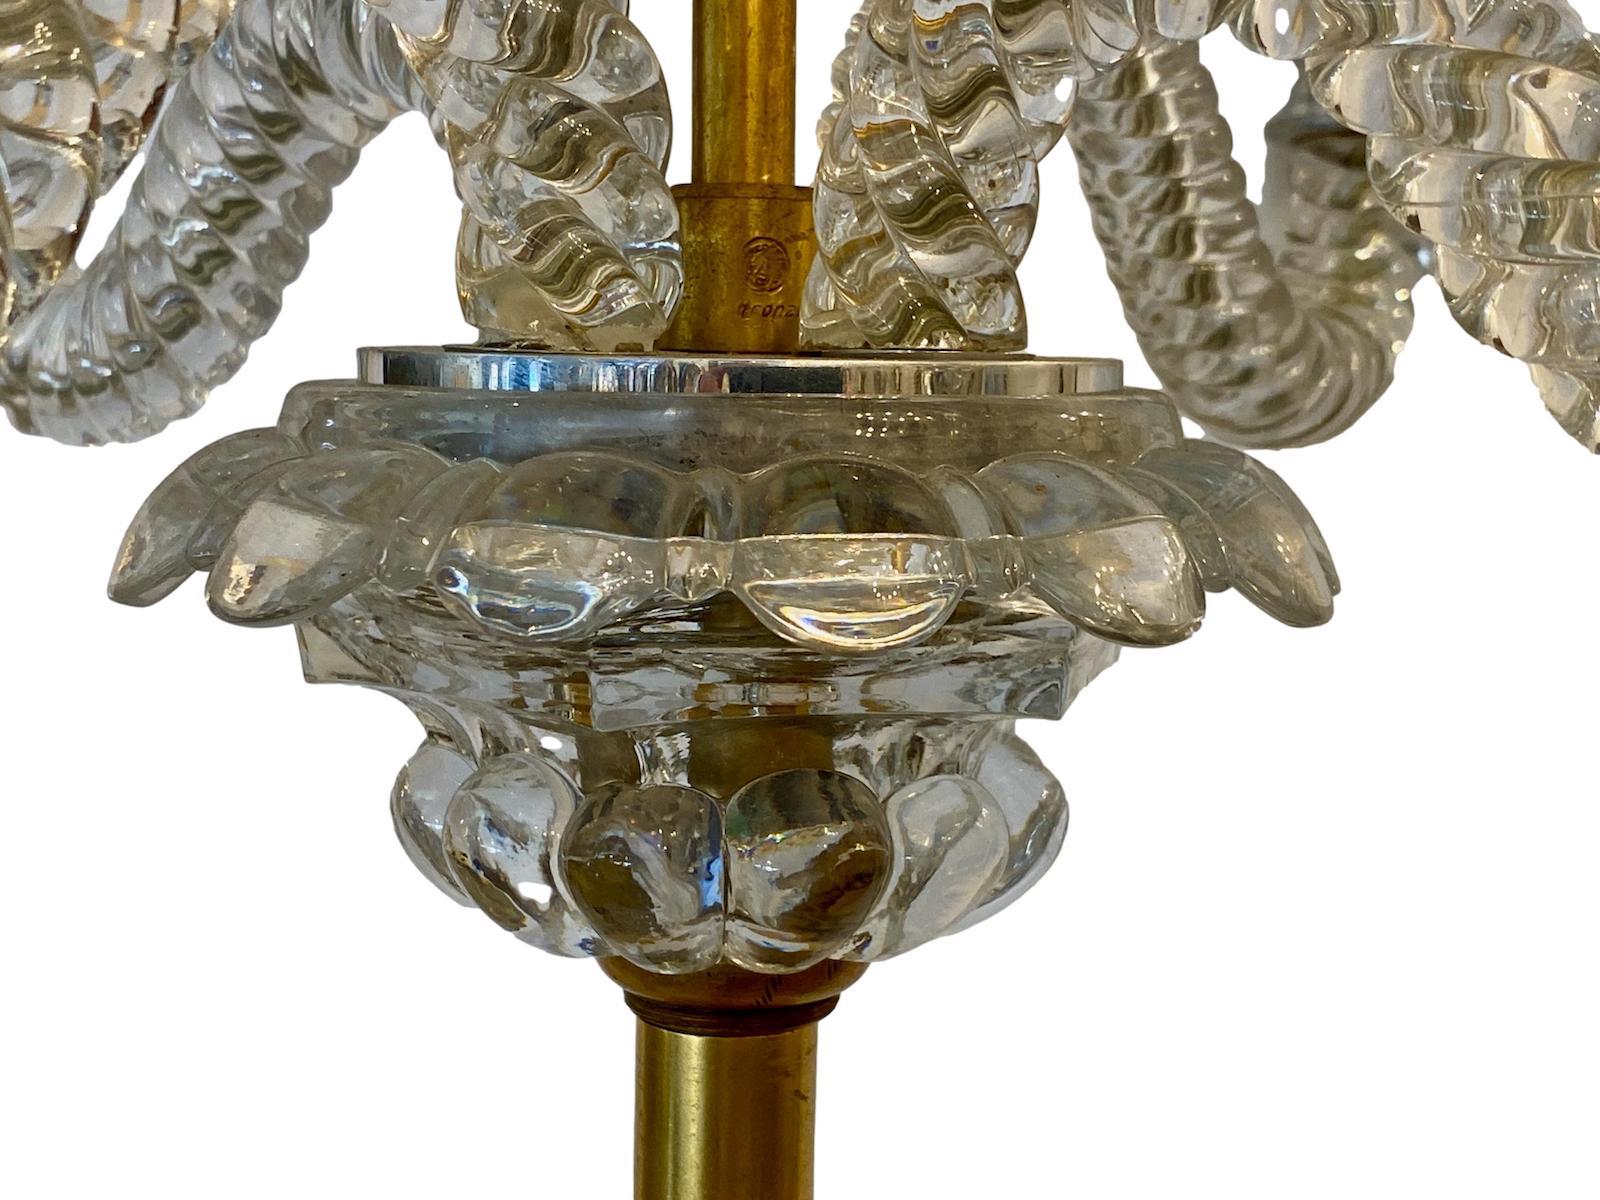 A circa 1920's French four-light crystal floor lamp. The body and base made of gilt bronze.

Measurements:
Height to shade rest 67